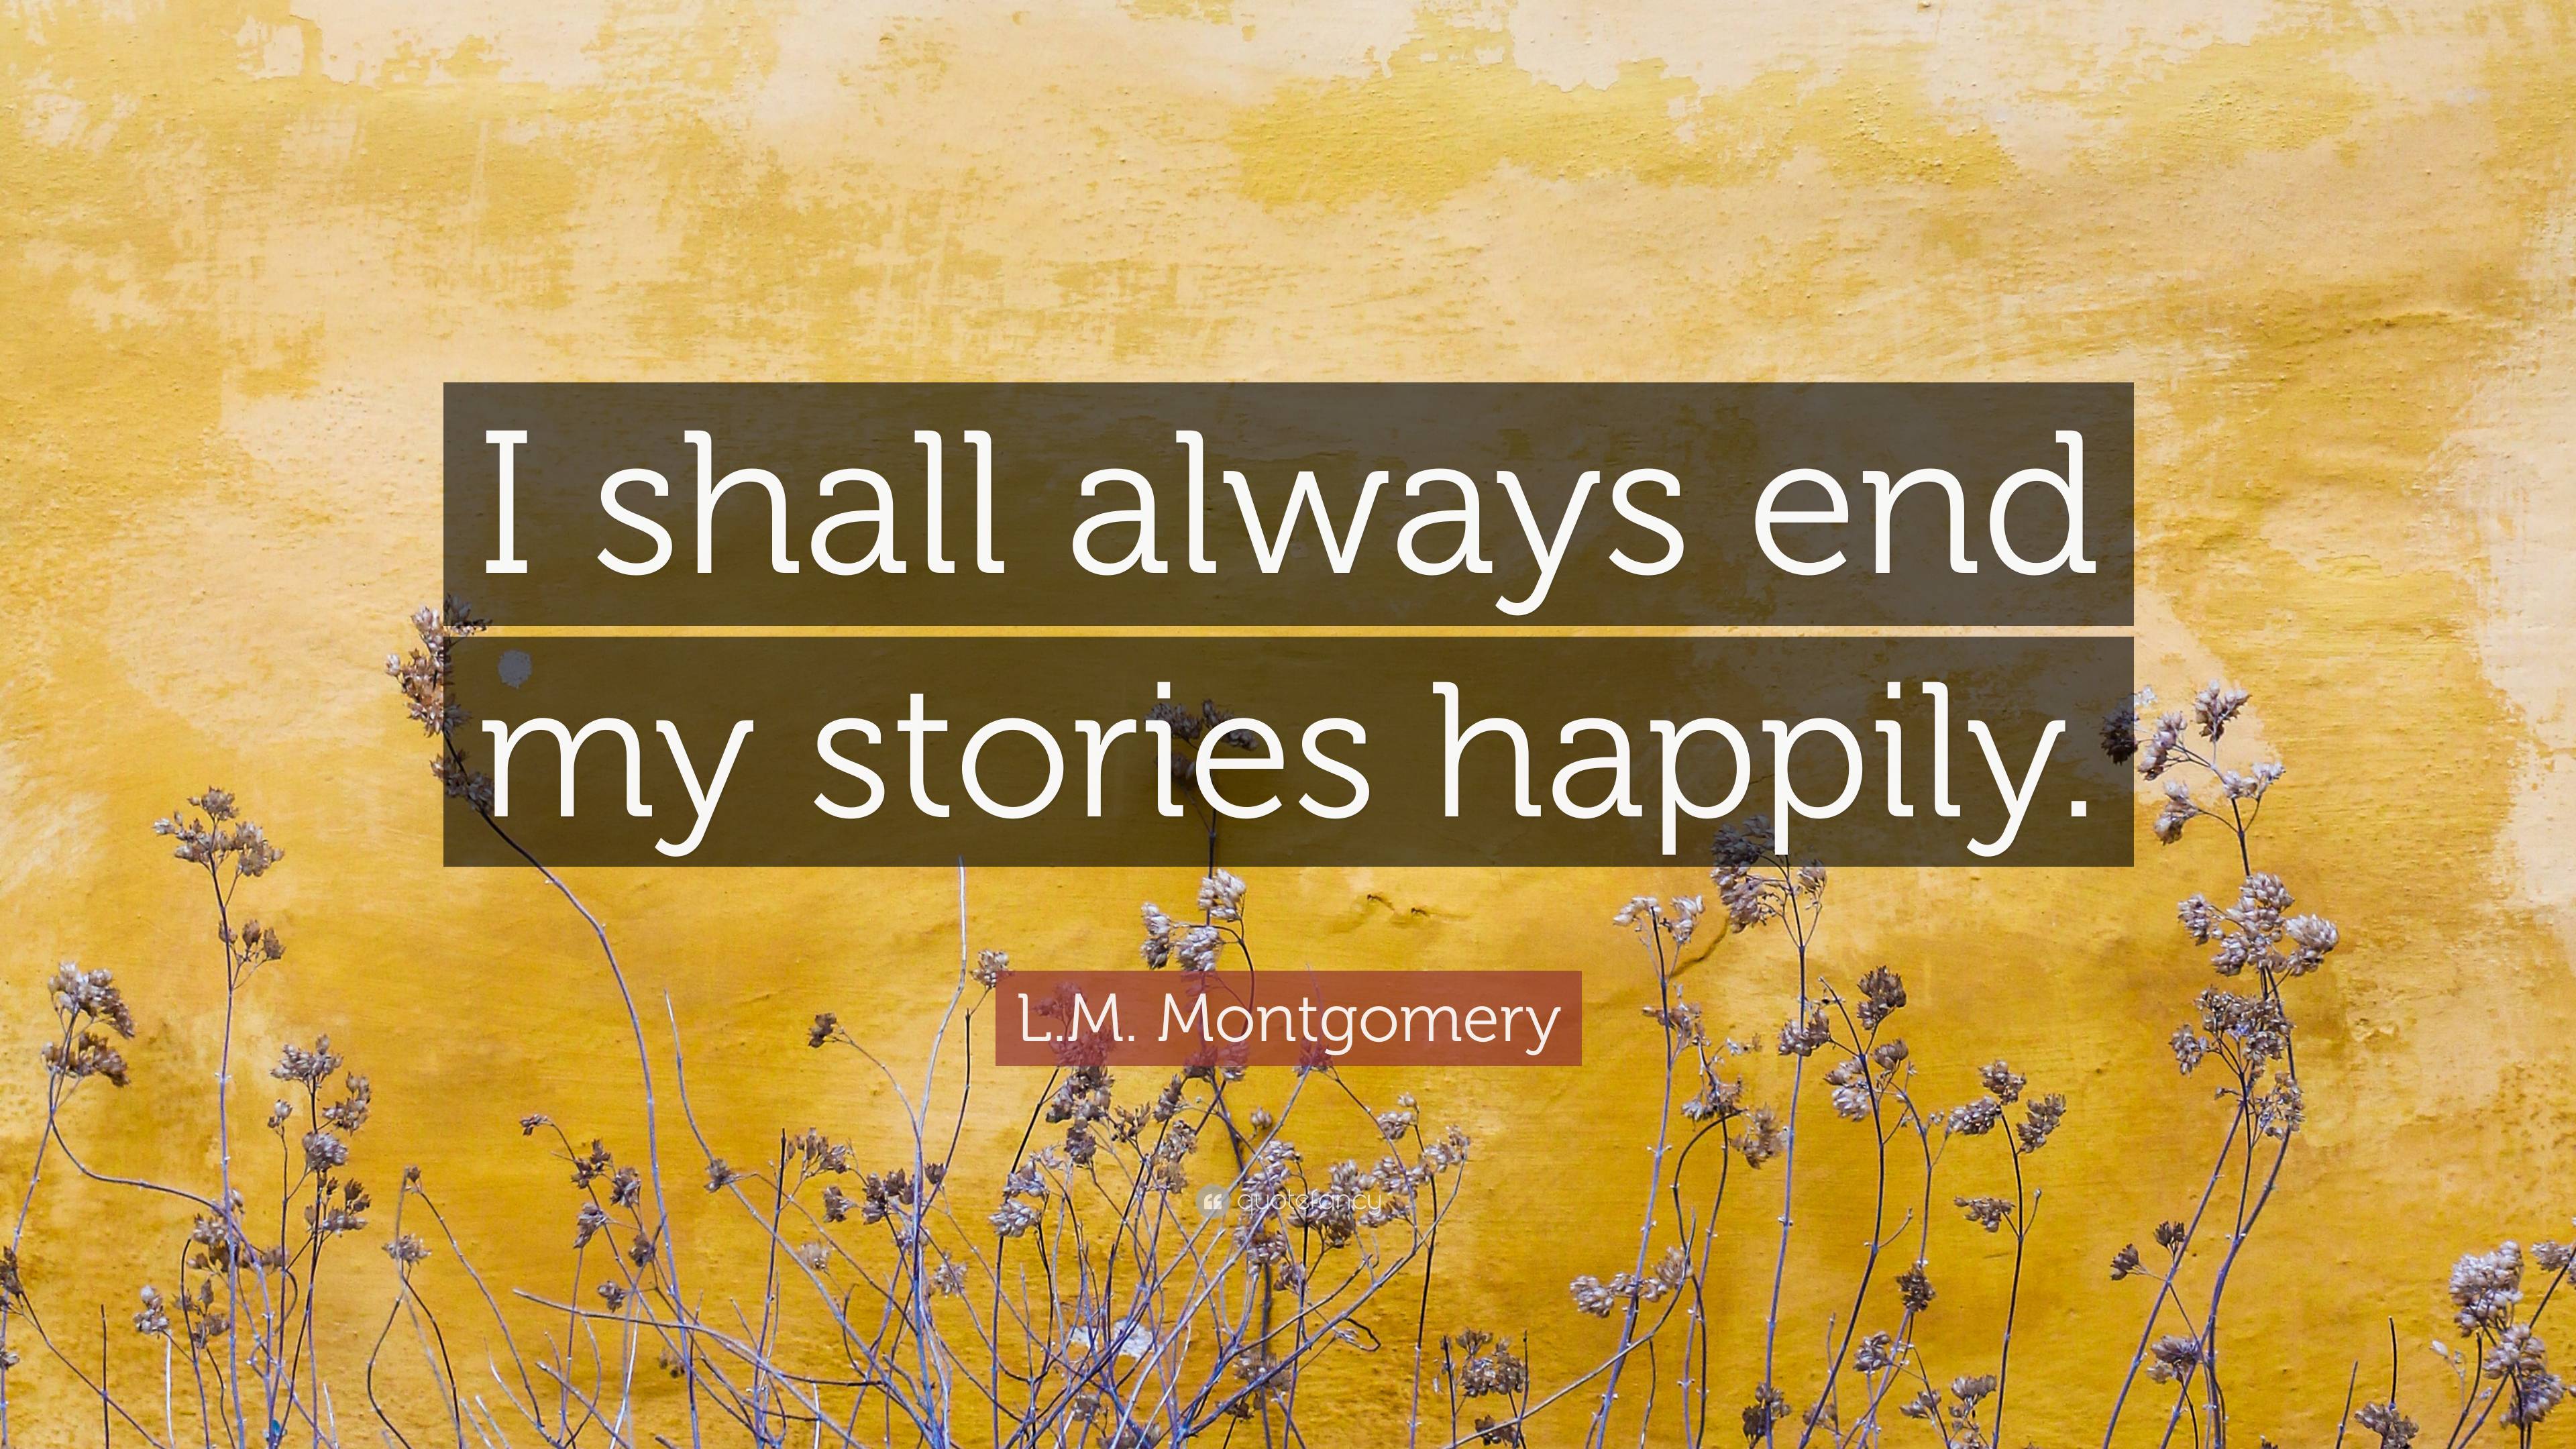 L.M. Montgomery Quote: “I shall always end my stories happily.”